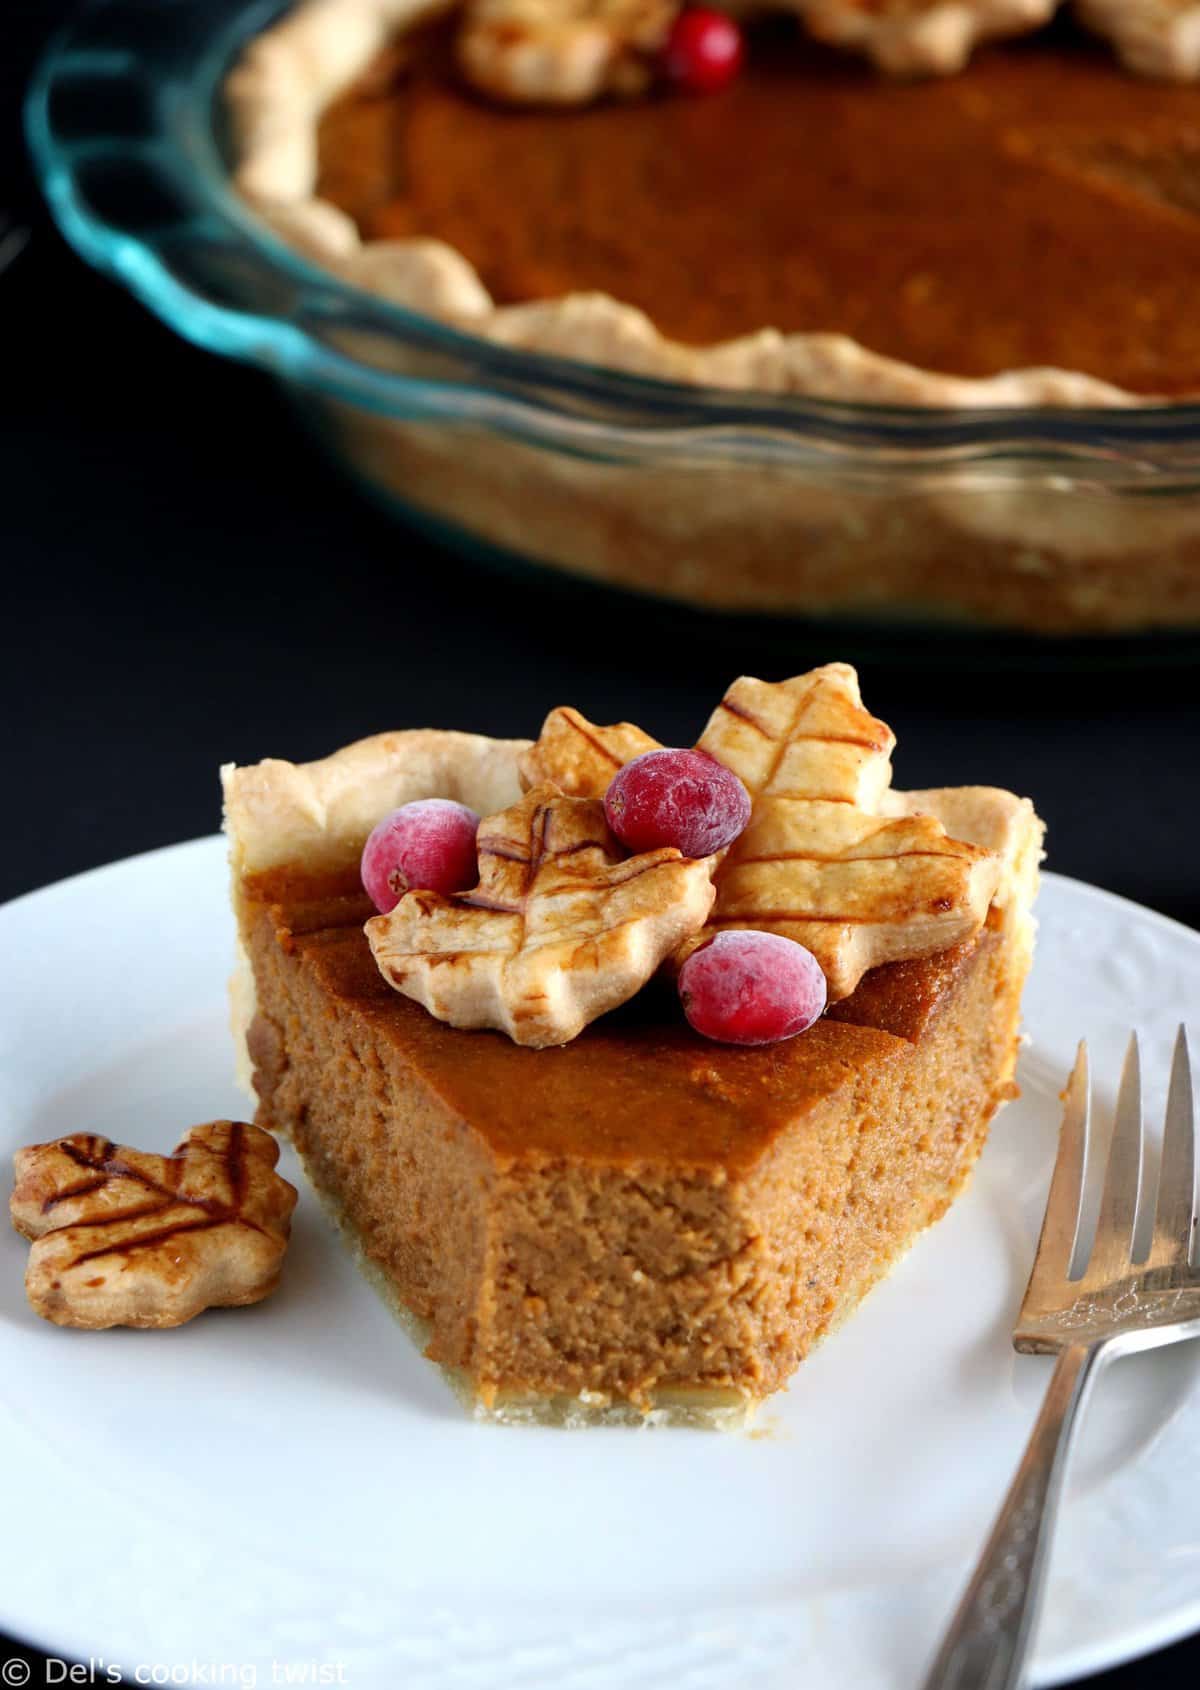 This classic pumpkin pie recipe features a flaky pie crust and a smooth pumpkin filling bursting with pumpkin spice flavors. Using wholesome ingredients only, it's the ultimate Thanksgiving dessert!